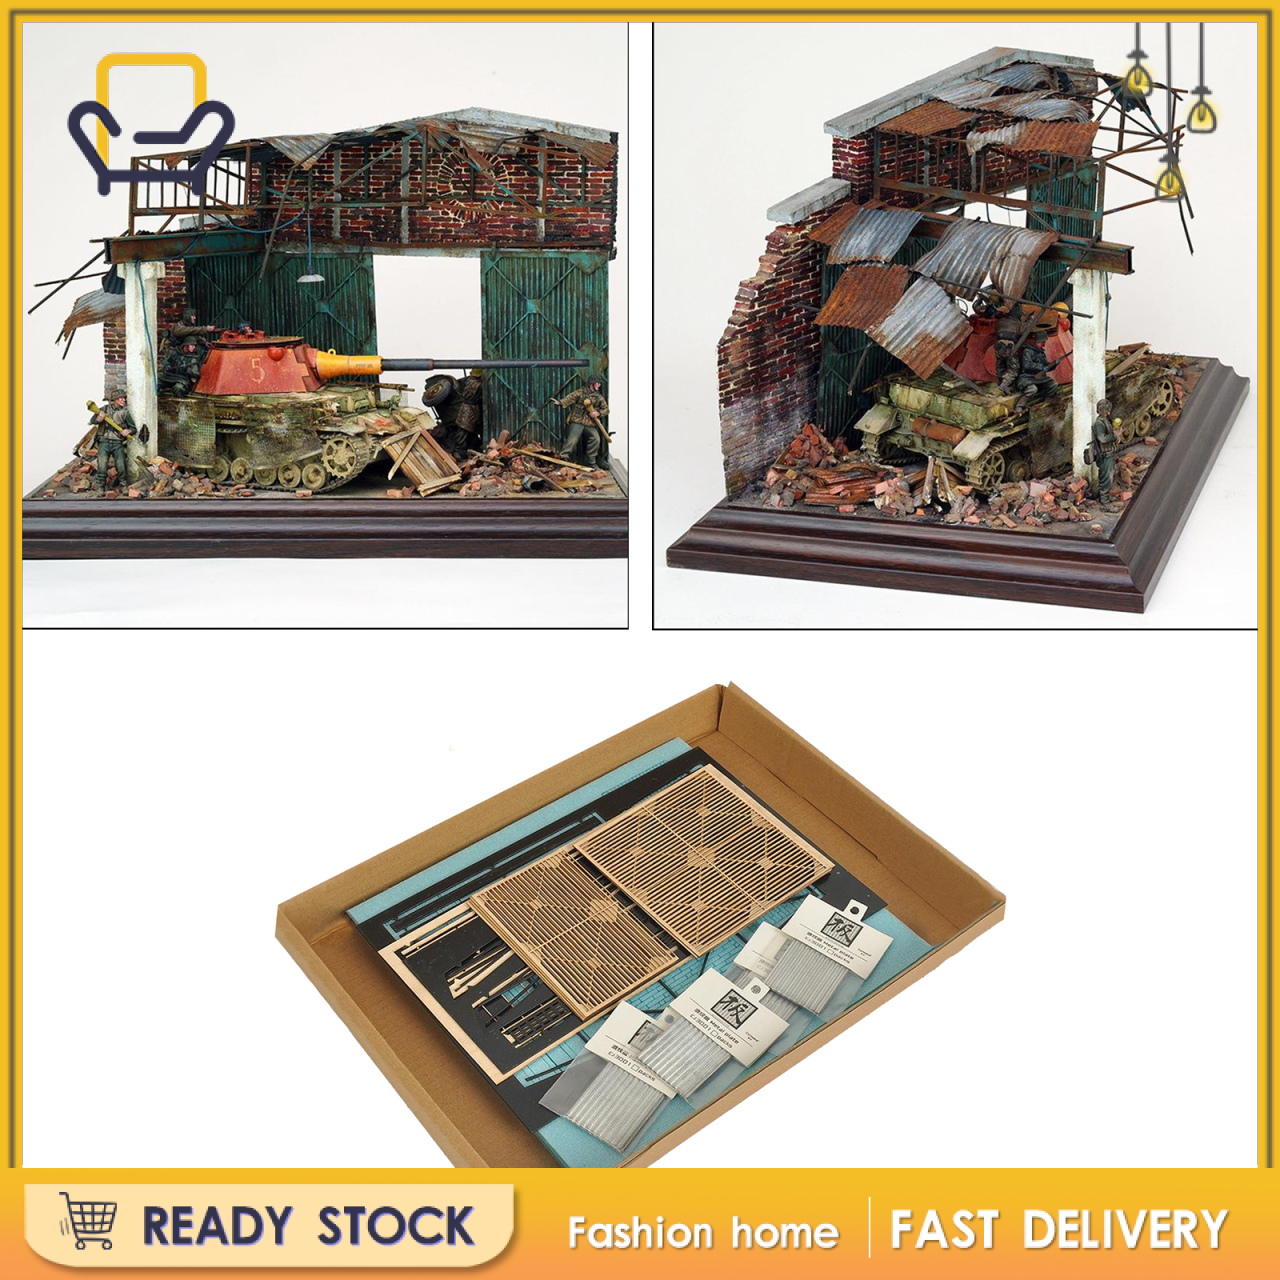 【Fashion home】1:35 DIY Dioramas Building Model Kits,Architecture Ruins House Scene Layout